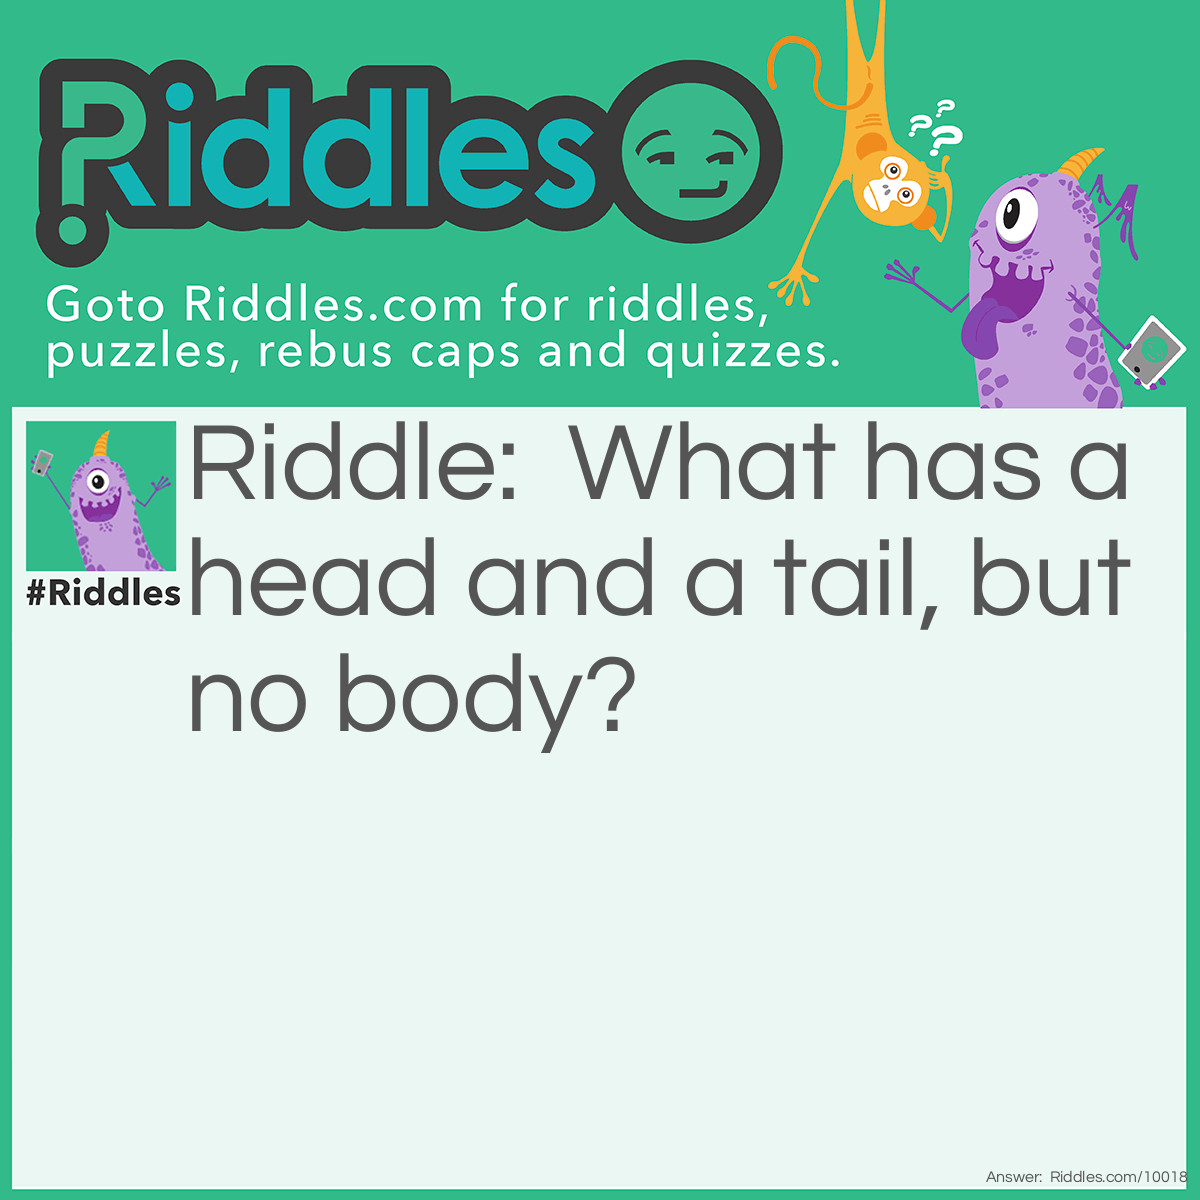 Riddle: What has a head and a tail, but no body? Answer: A coin!! Heads and Tails, but it has no body